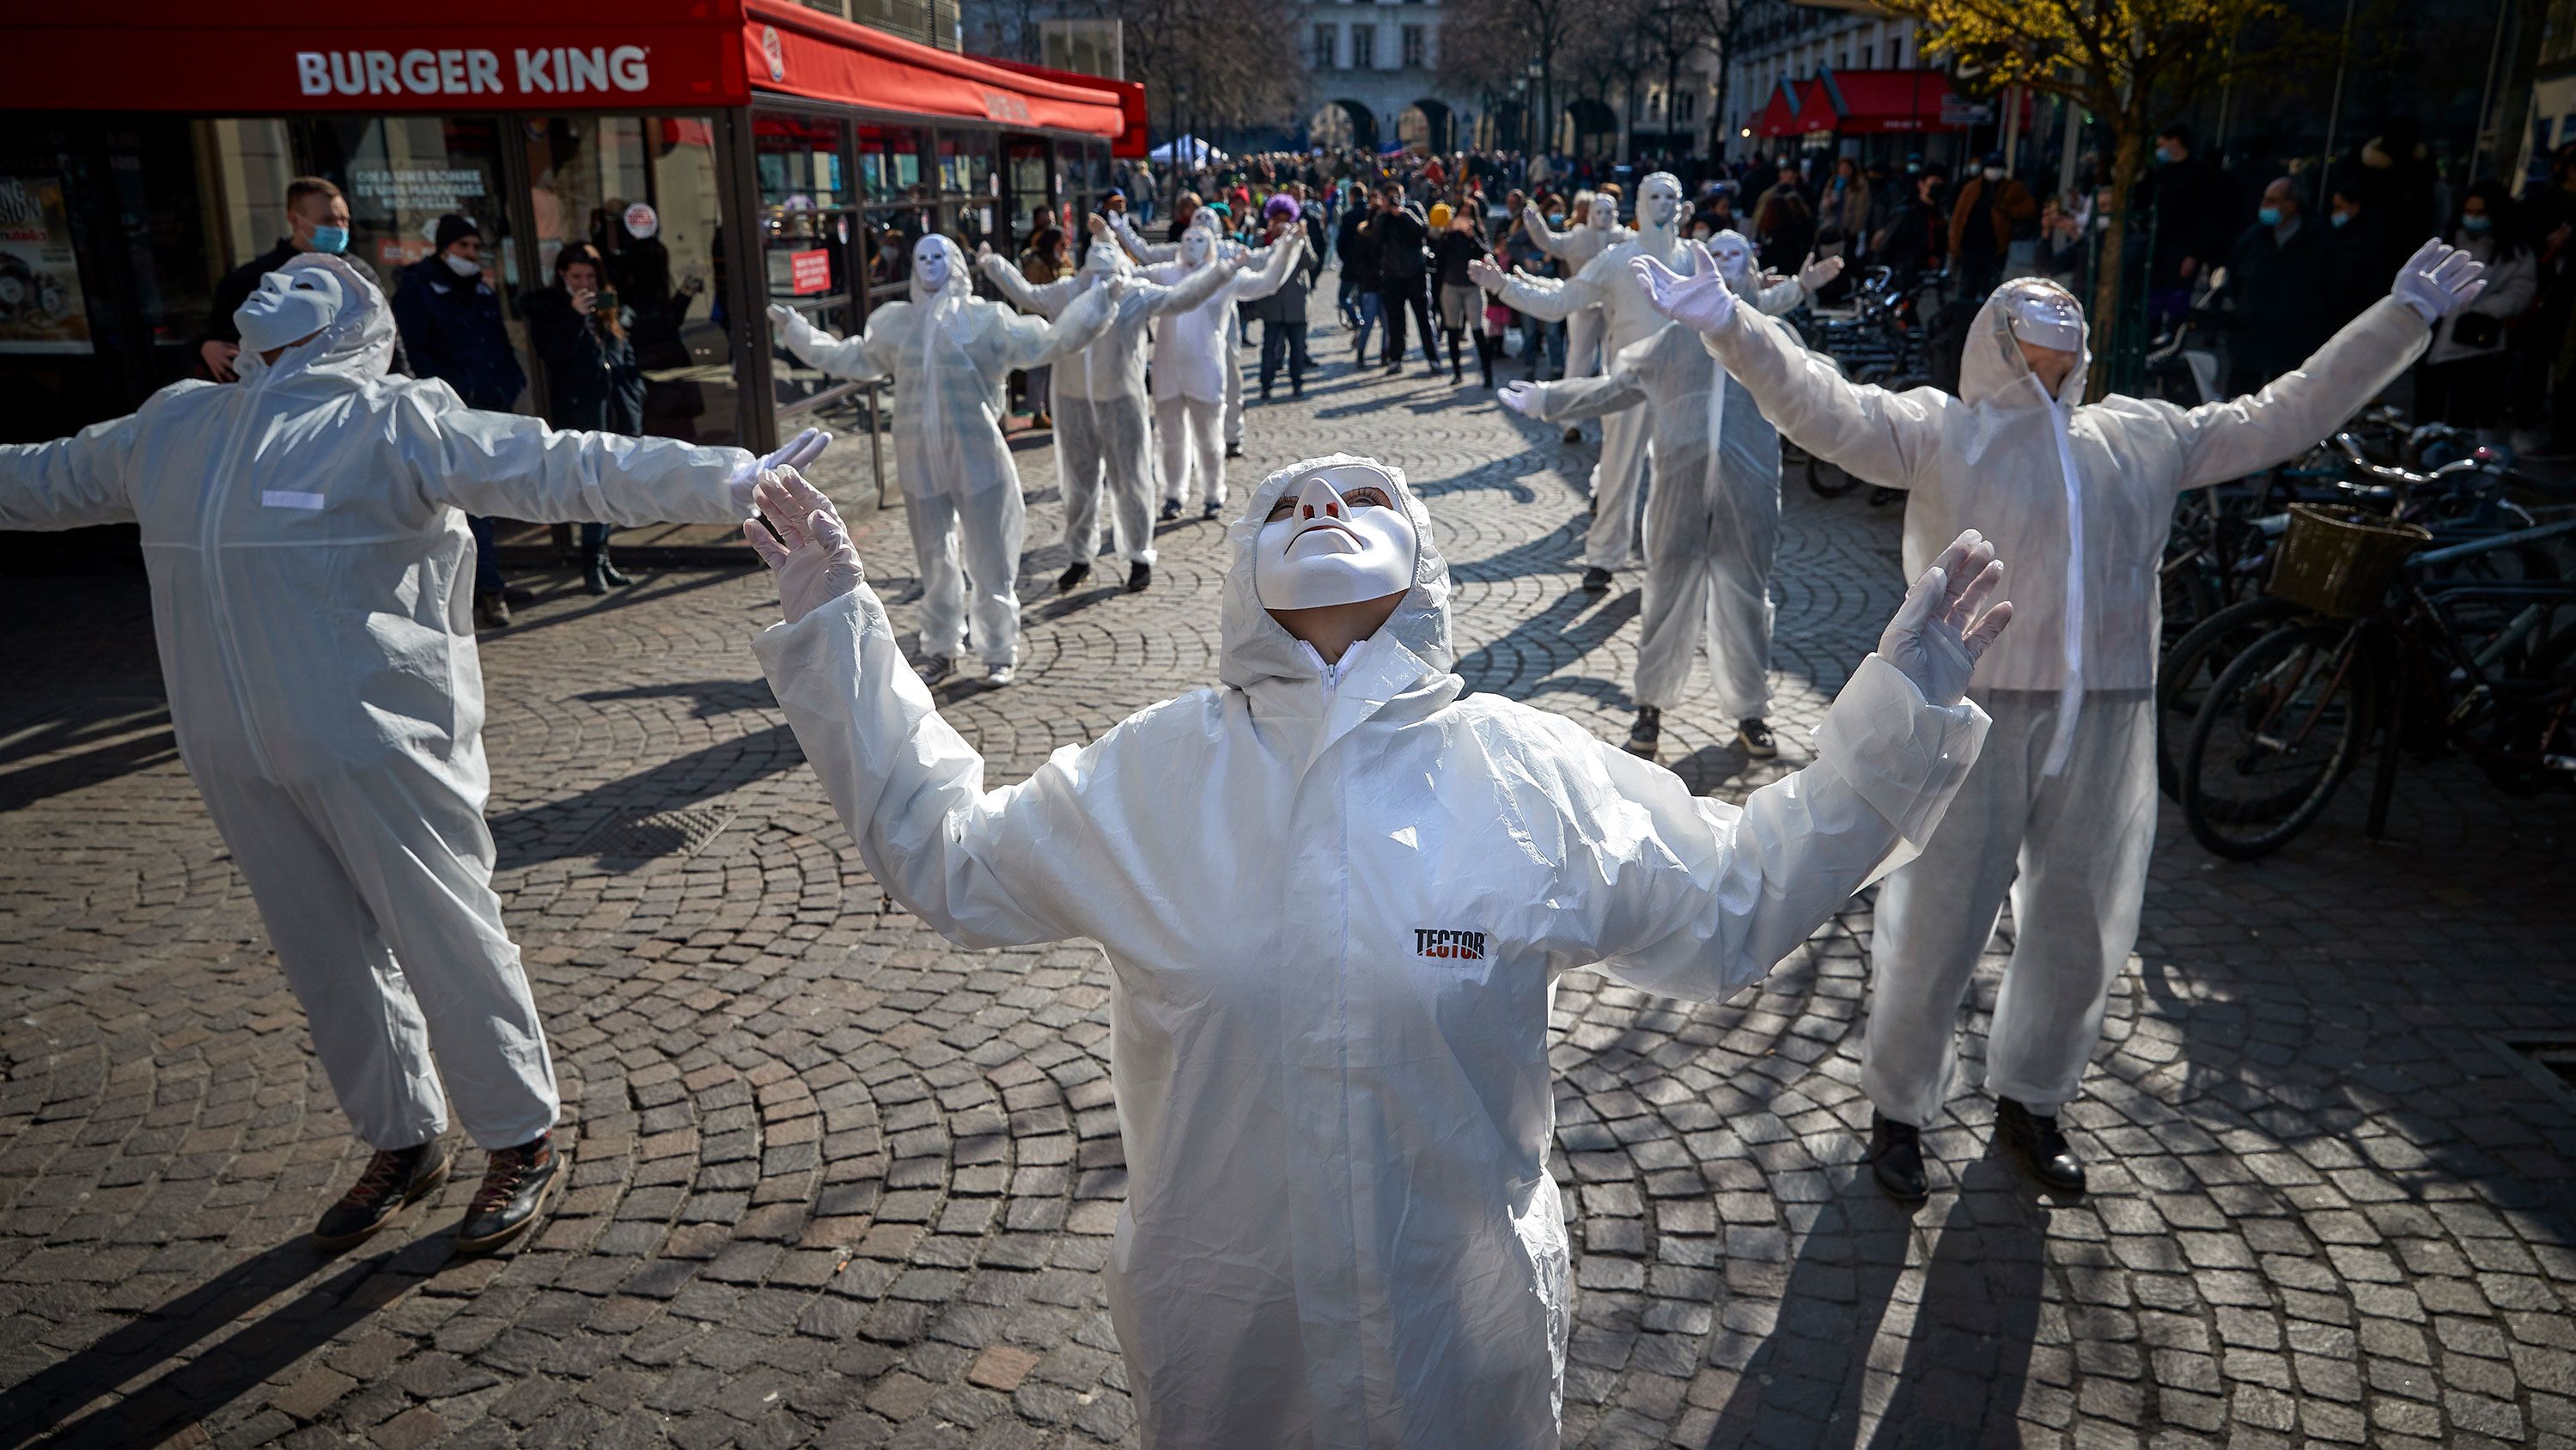 Anti-lockdown and anti-vaccination protesters demonstrate in Paris on the first day of a new four-week lockdown on March 20, 2021.